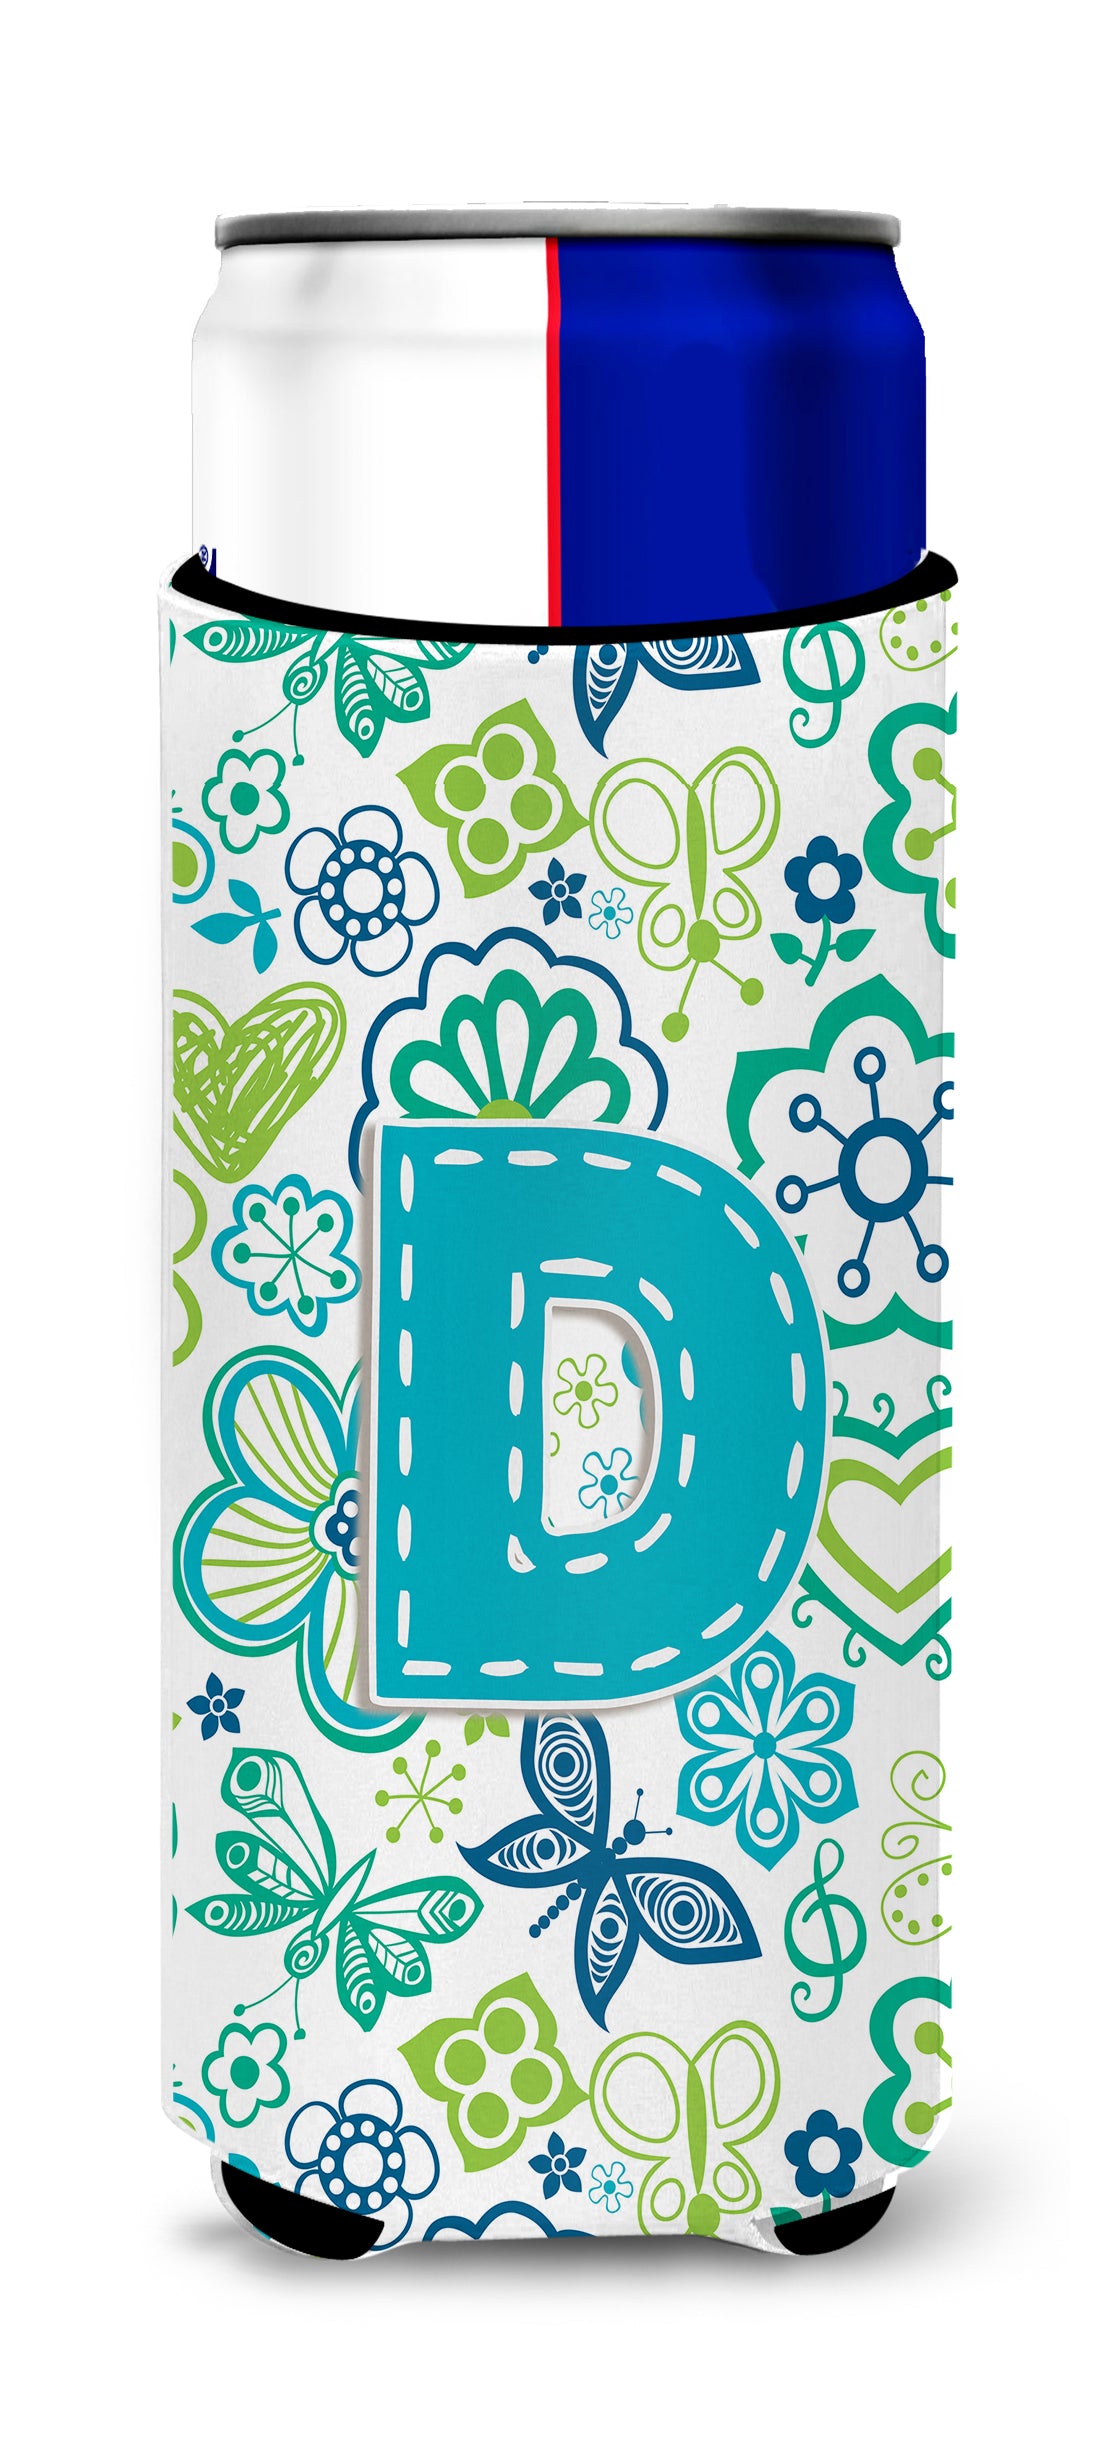 Letter D Flowers and Butterflies Teal Blue Ultra Beverage Insulators for slim cans CJ2006-DMUK.